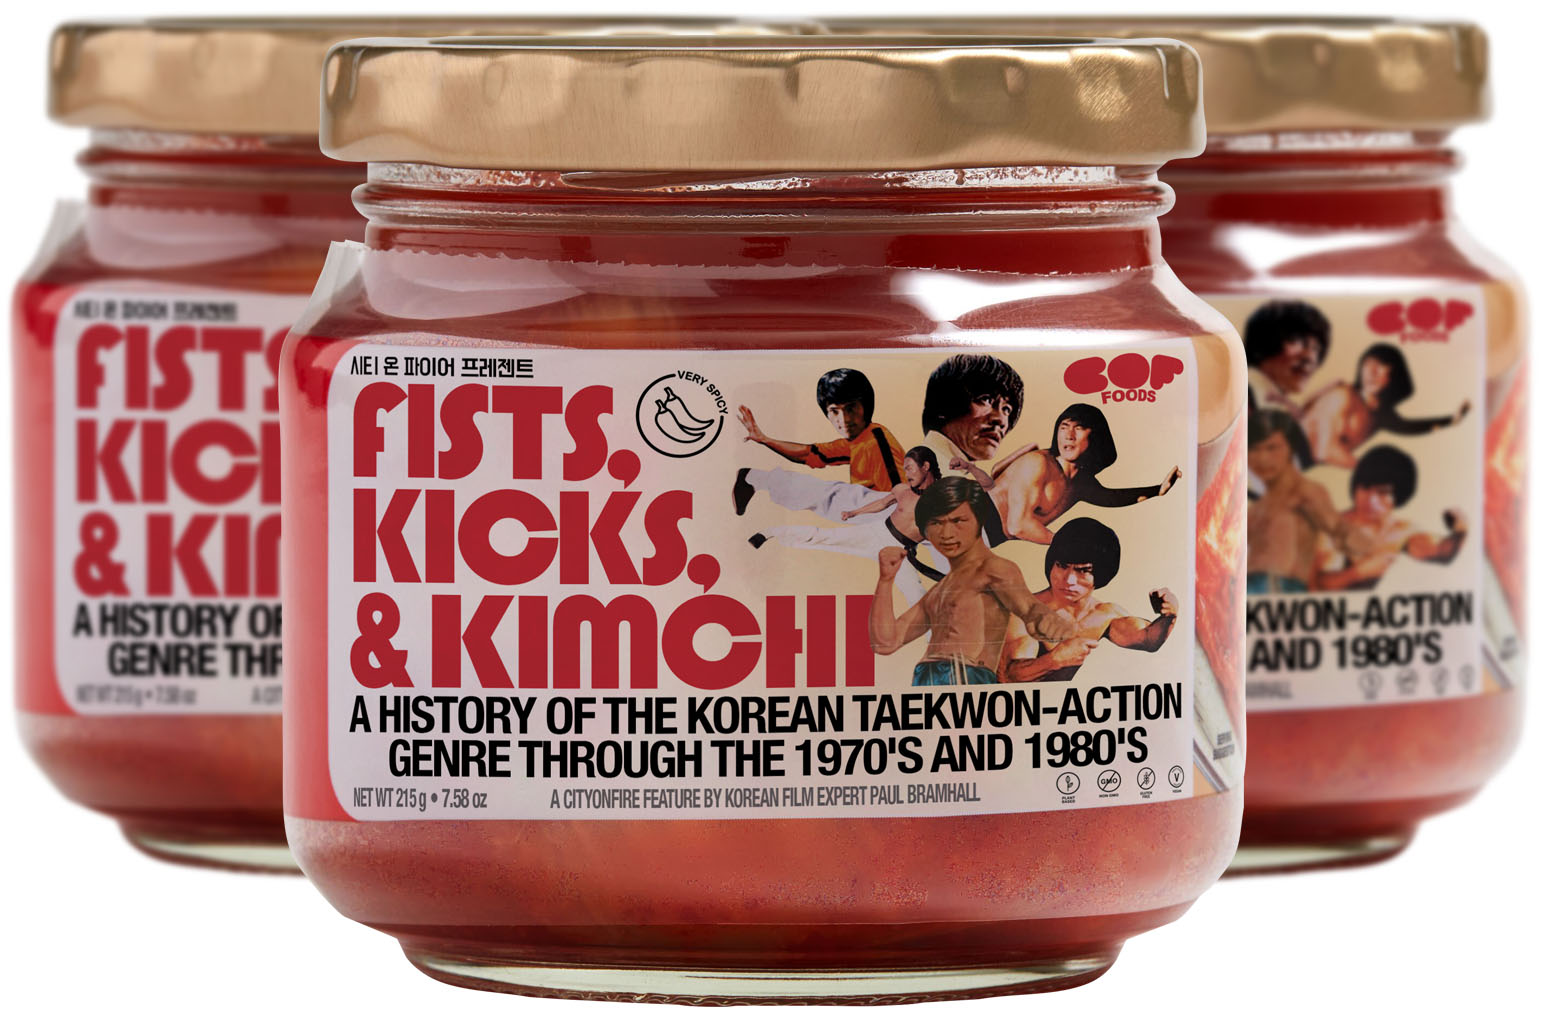 Fists, Kicks, & Kimchi: A History of the Korean Taekwon-Action Genre in the 1970’s – 1980’s